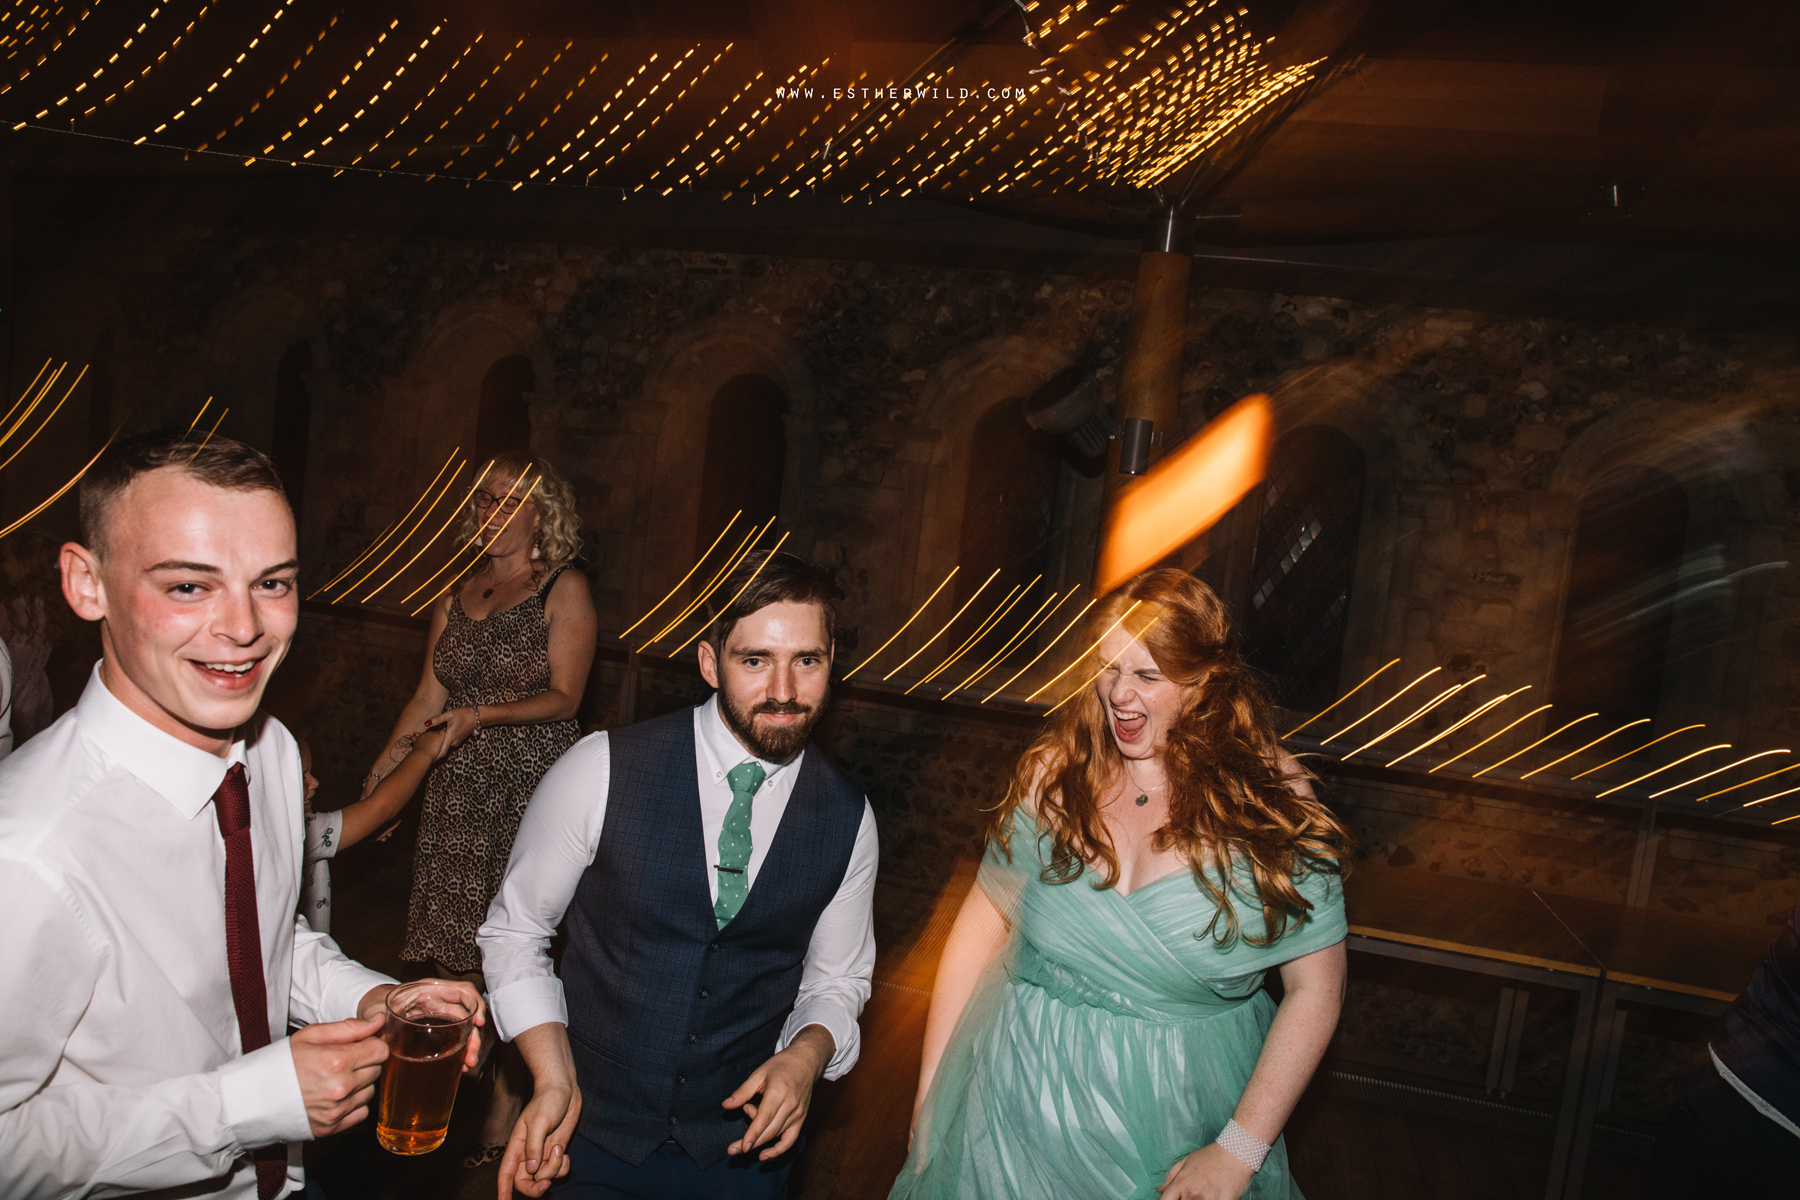 Norwich_Castle_Arcade_Grosvenor_Chip_Birdcage_Cathedral_Cloisters_Refectory_Wedding_Photography_Esther_Wild_Photographer_Norfolk_Kings_Lynn_3R8A3325.jpg